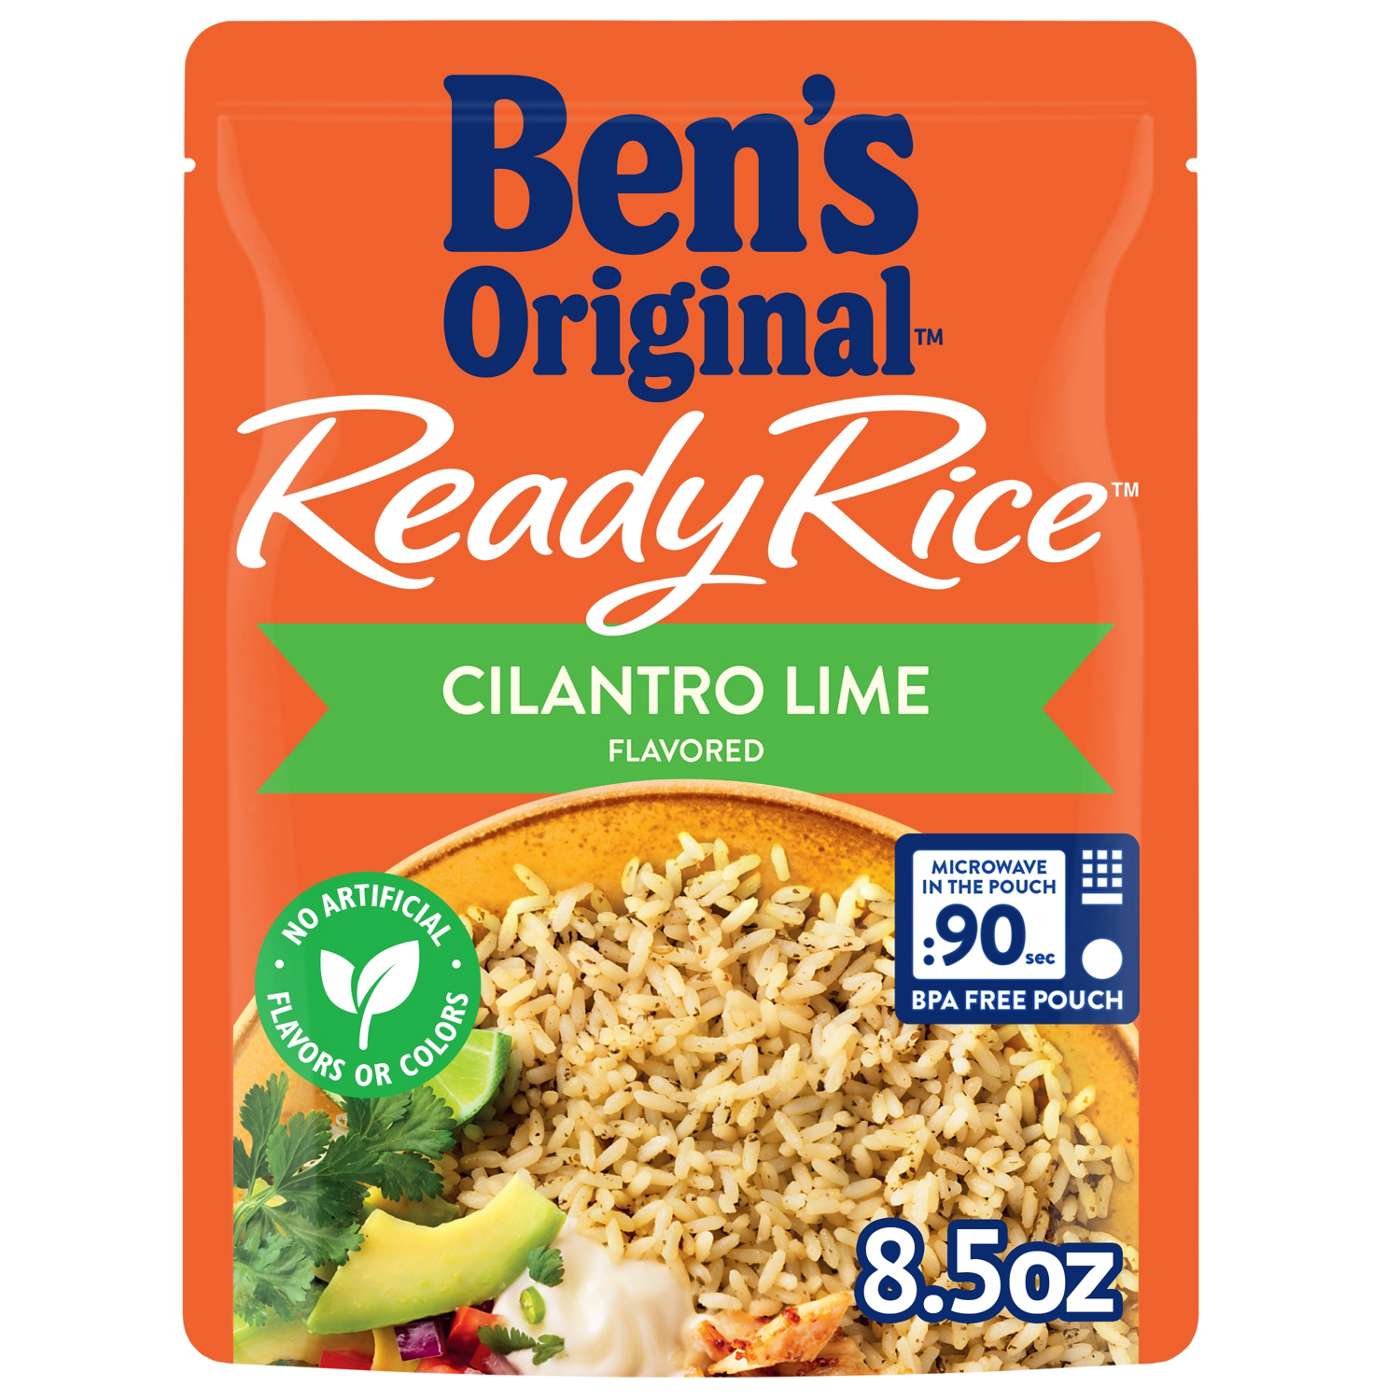 Ben's Original Ready Rice Cilantro Lime Flavored Rice; image 1 of 2